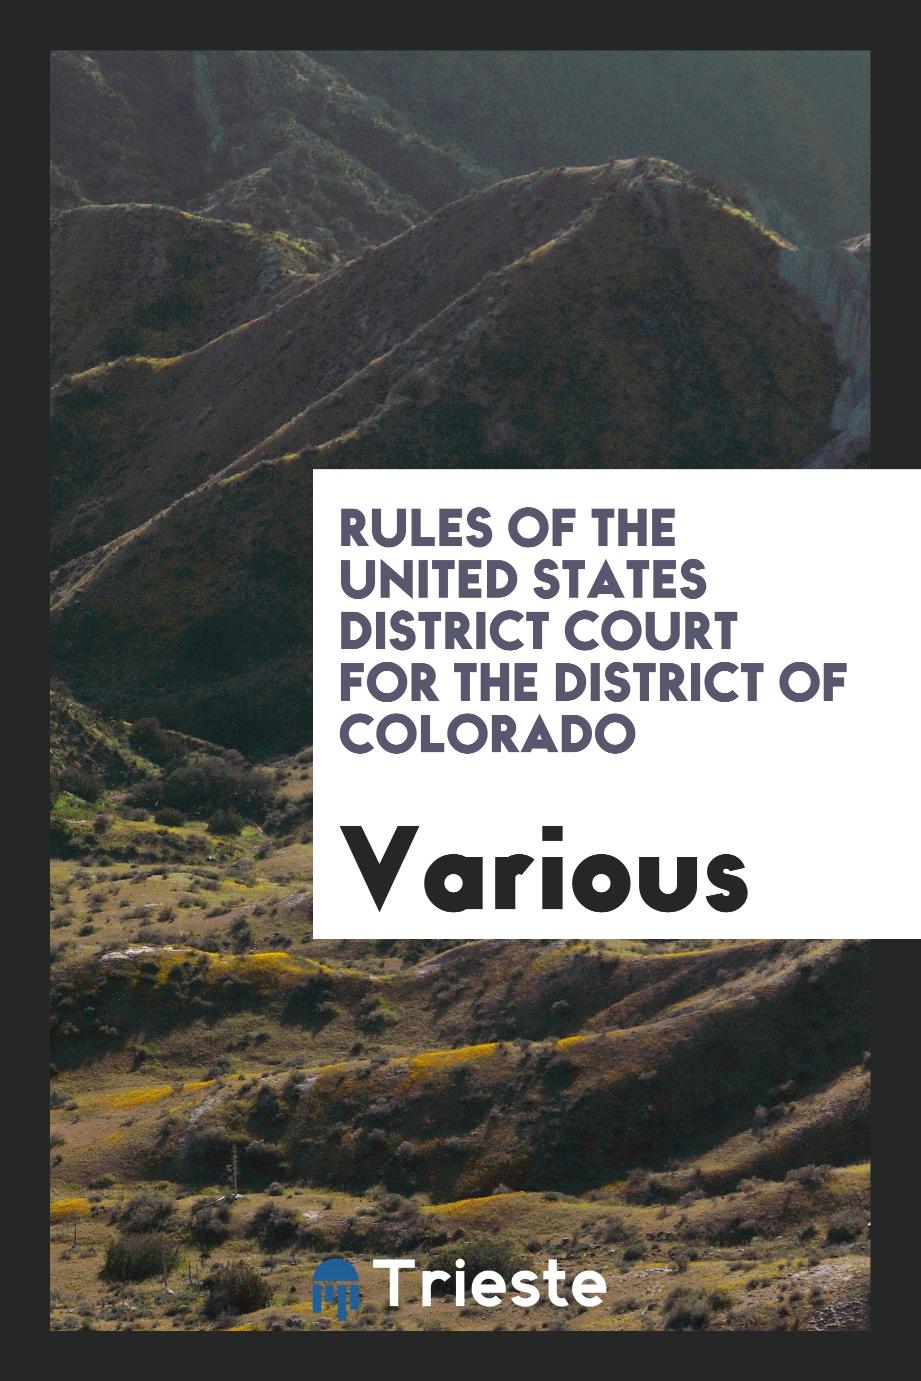 Rules of the United States District Court for the District of Colorado